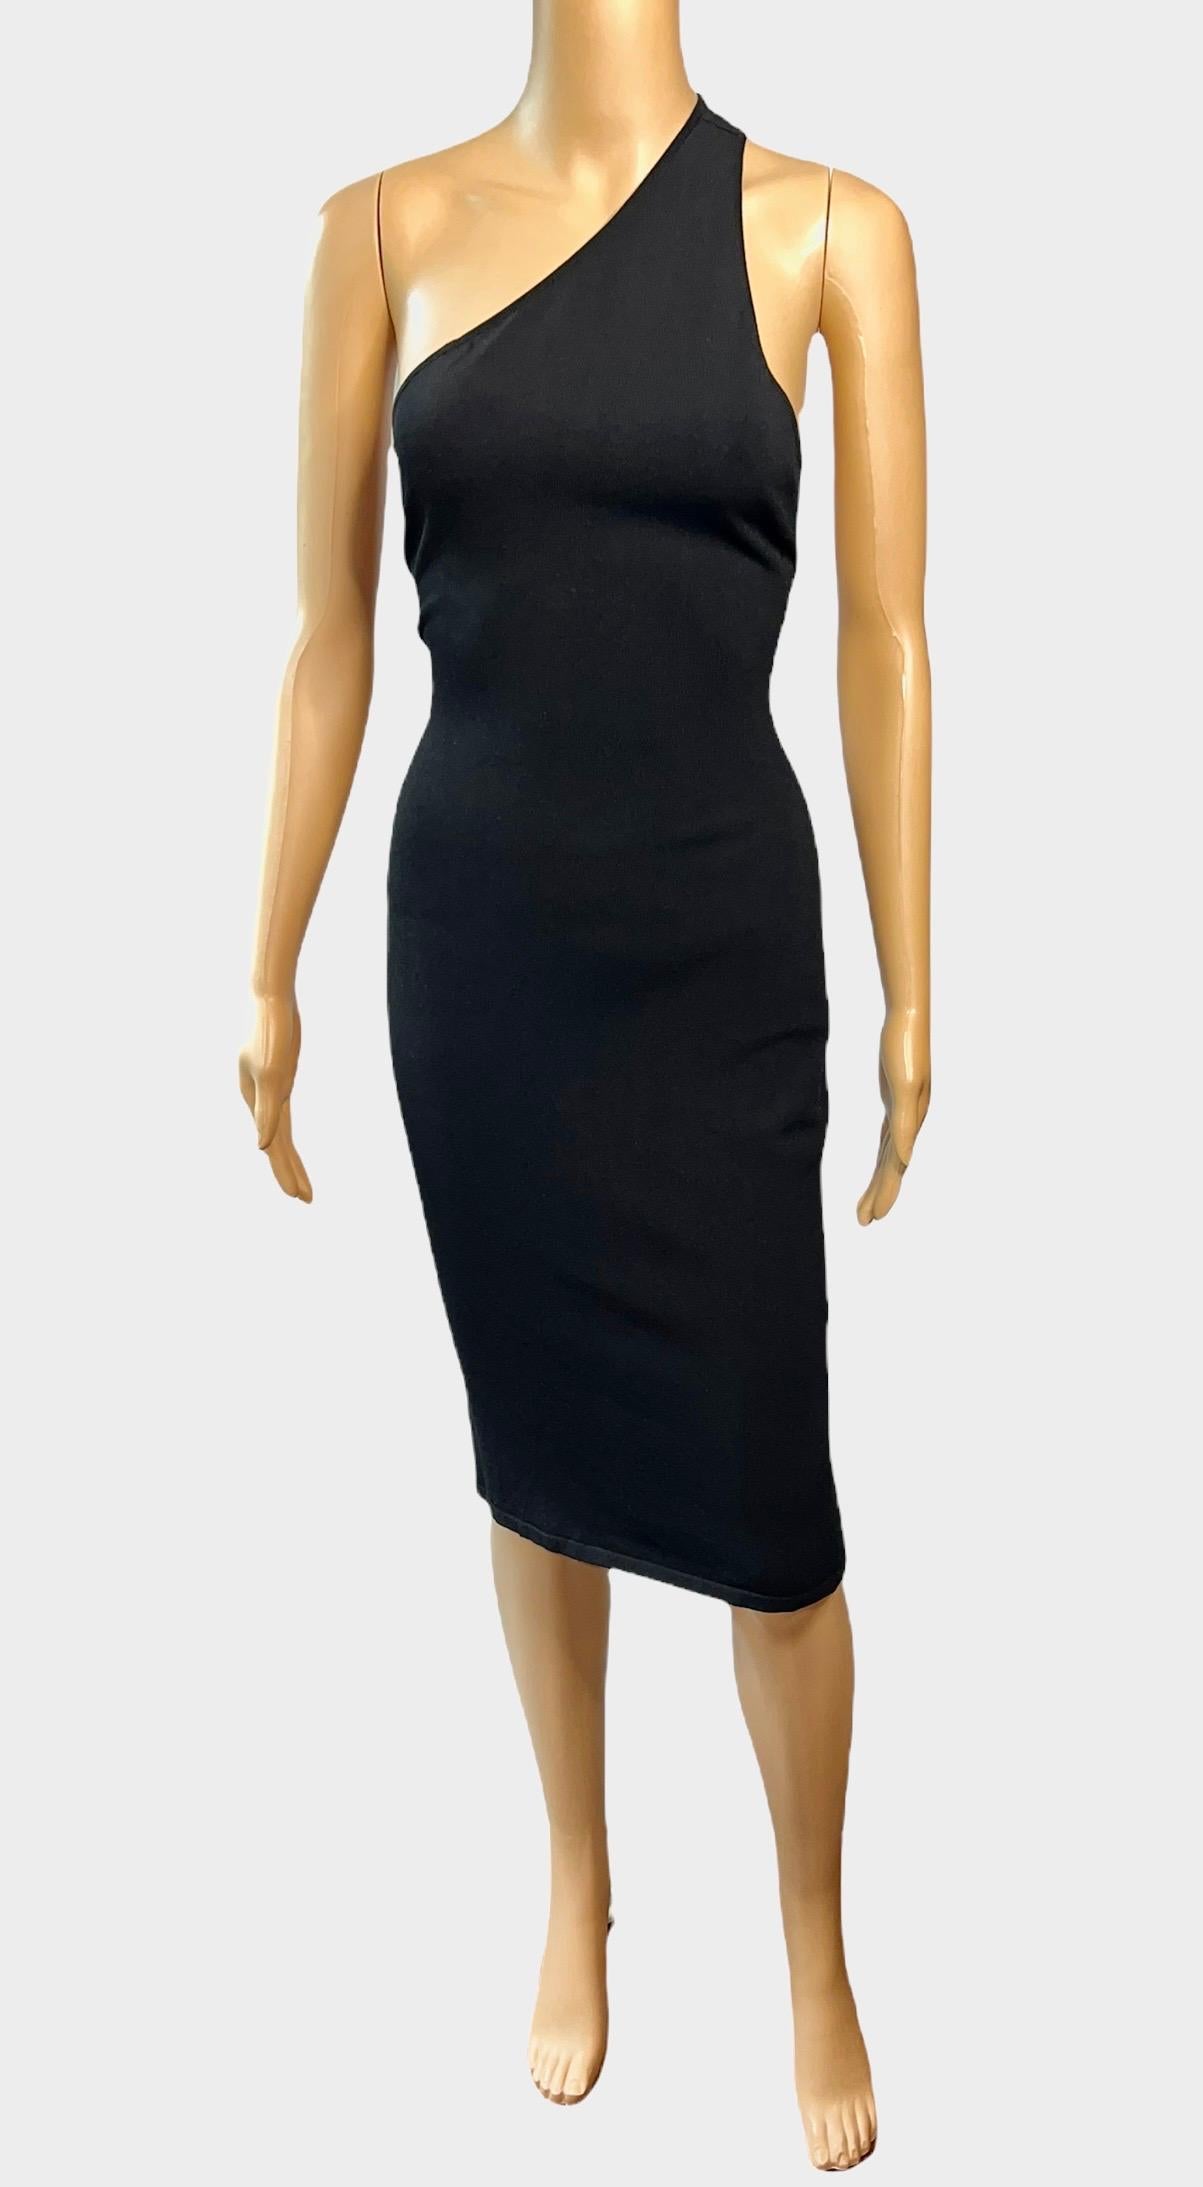 Tom Ford for Gucci S/S 2000 Cutout Bodycon Knit Black Dress For Sale 3